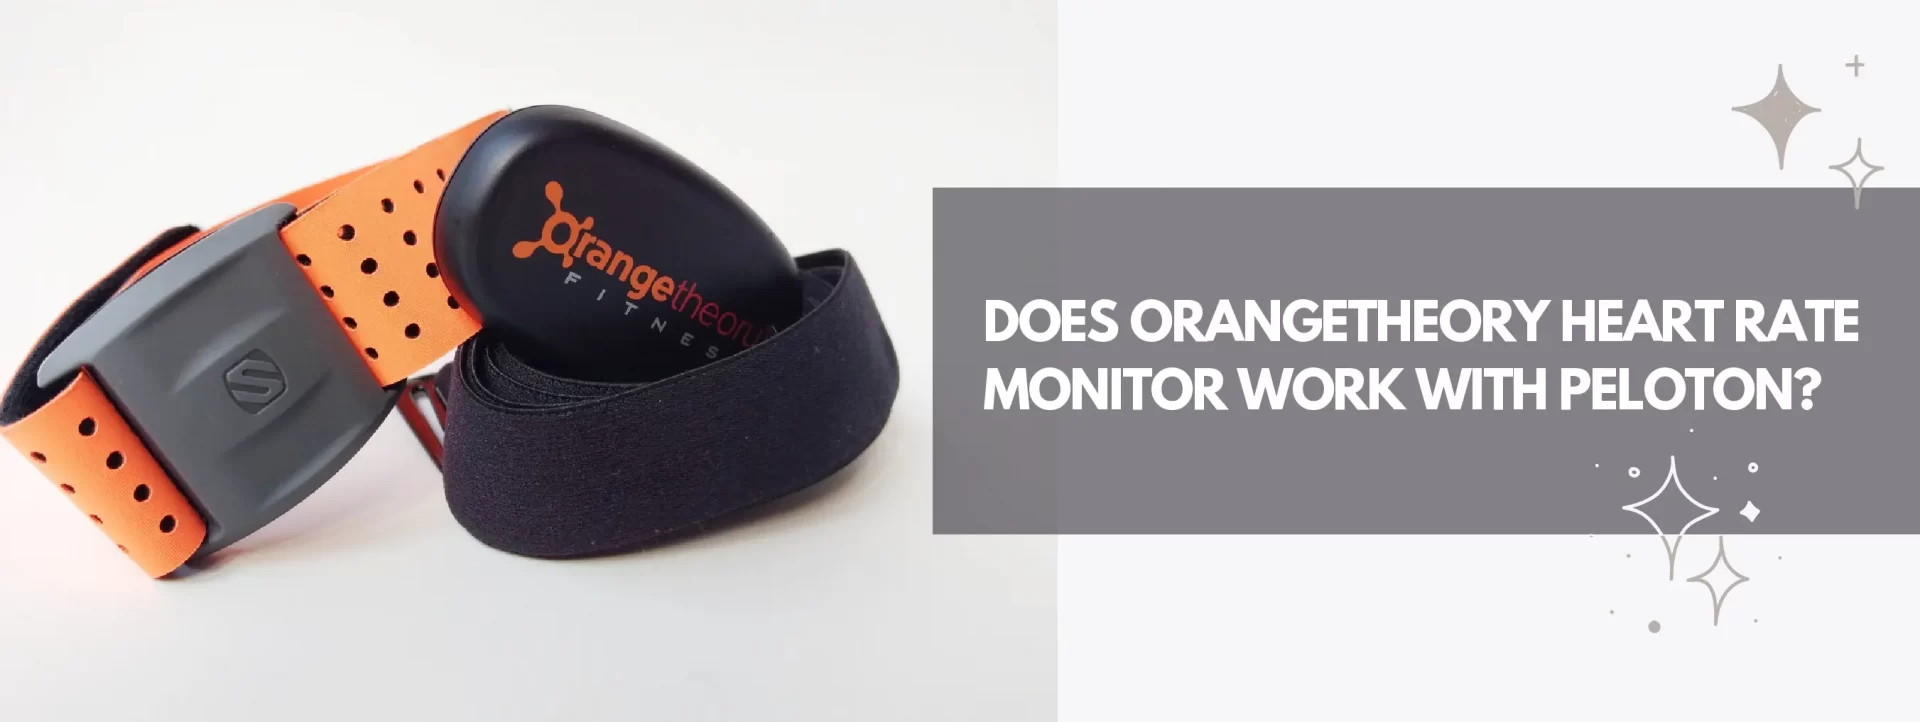 Does Orangetheory Heart Rate Monitor Work With Peloton